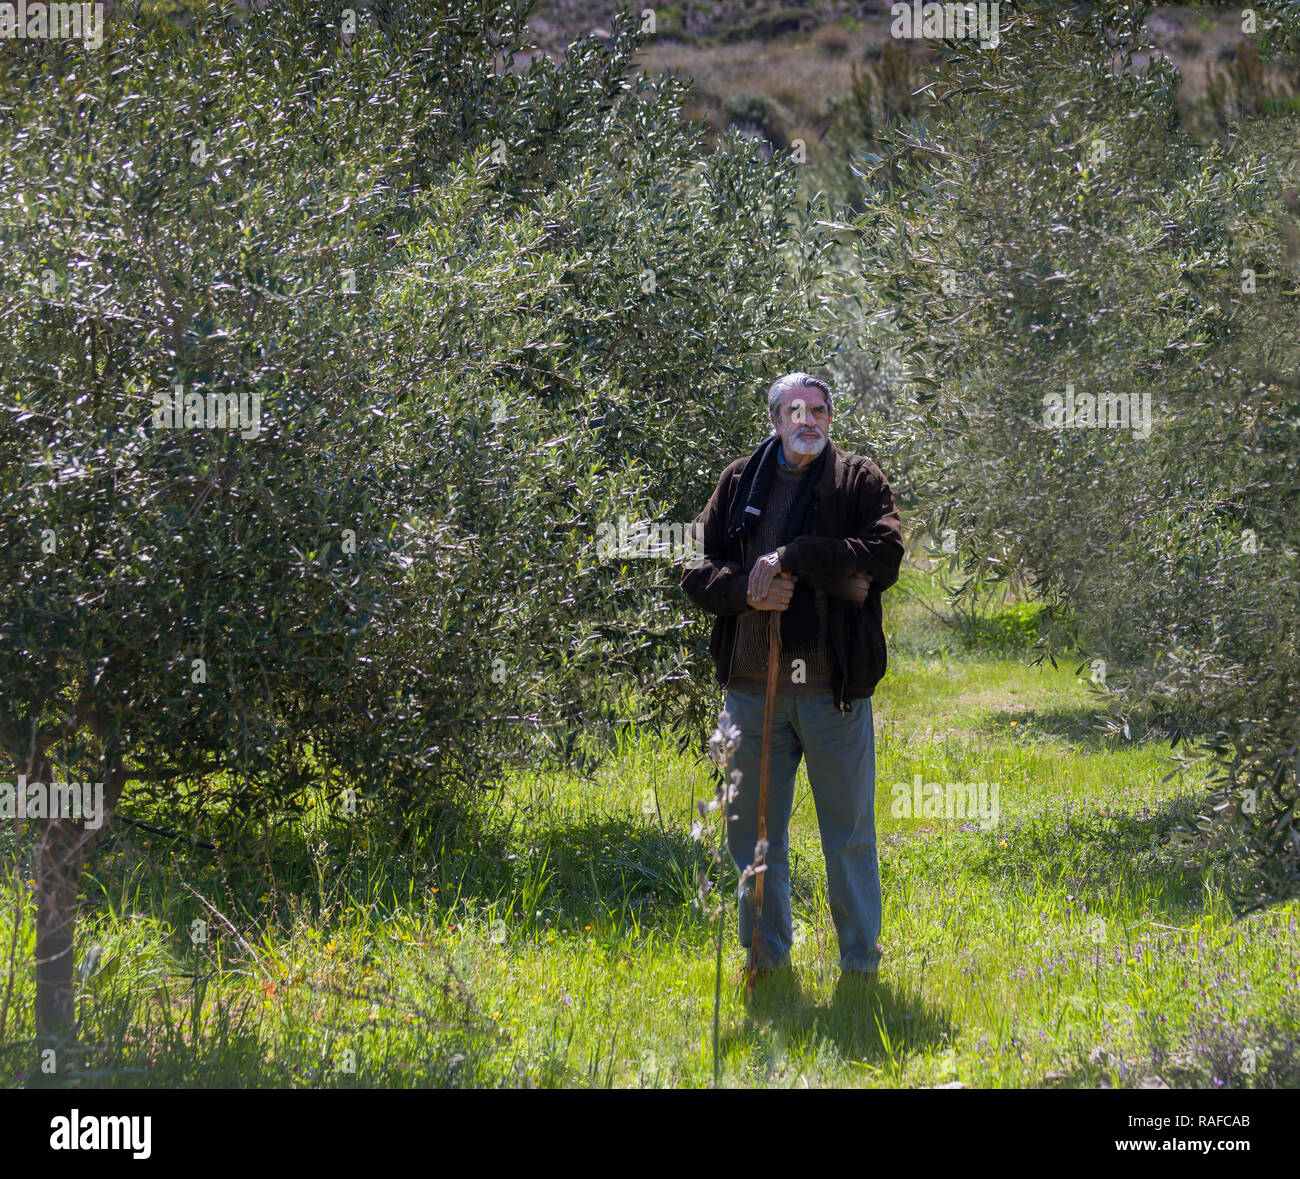 Man standing in Olive Grove. Senior citizen standing inspecting the  olive trees. Stock Image Stock Photo